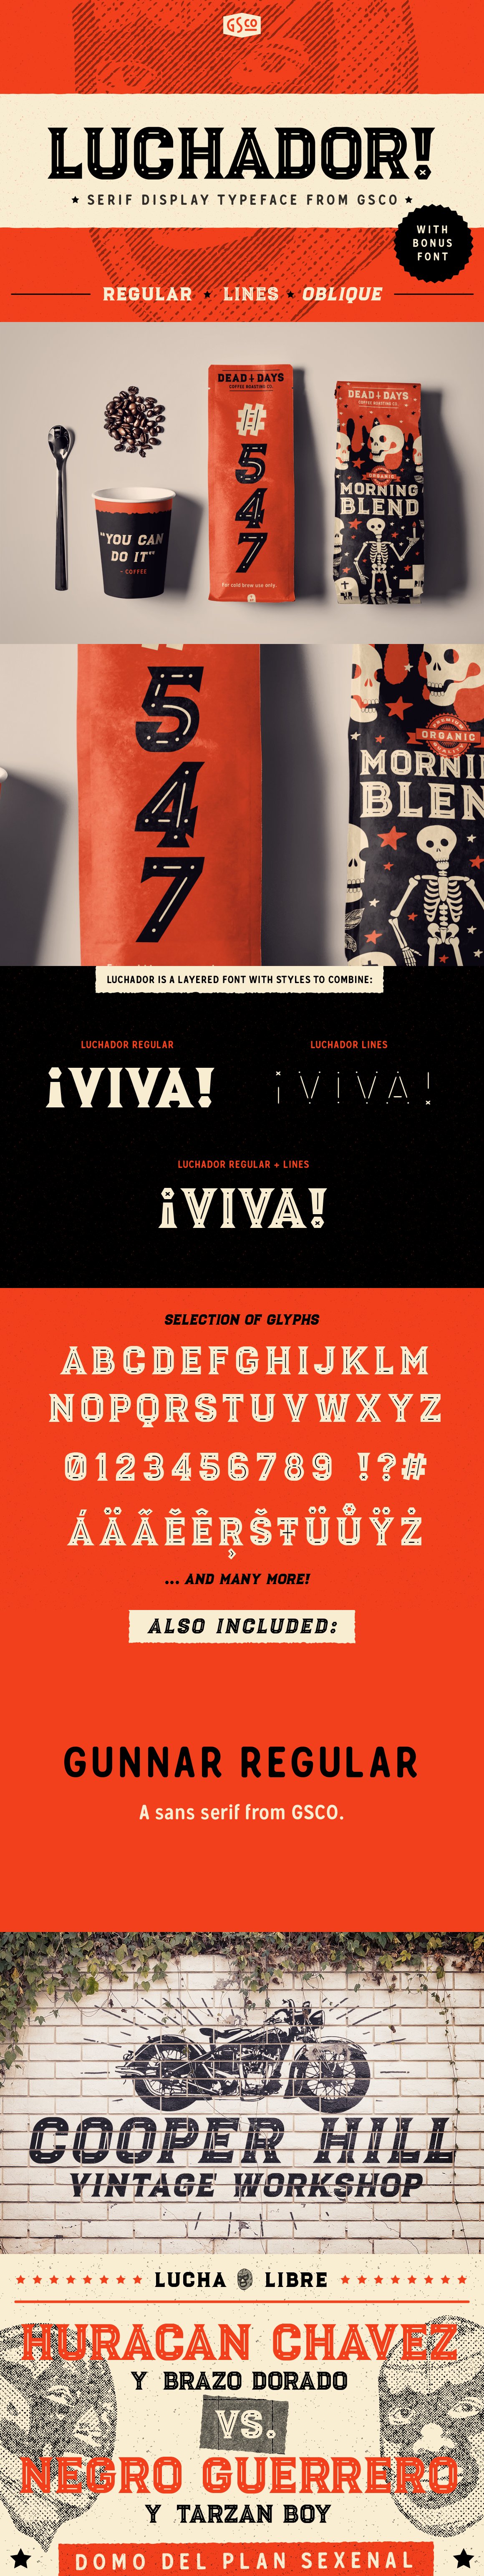 Luchador - Serif display typeface cover image.